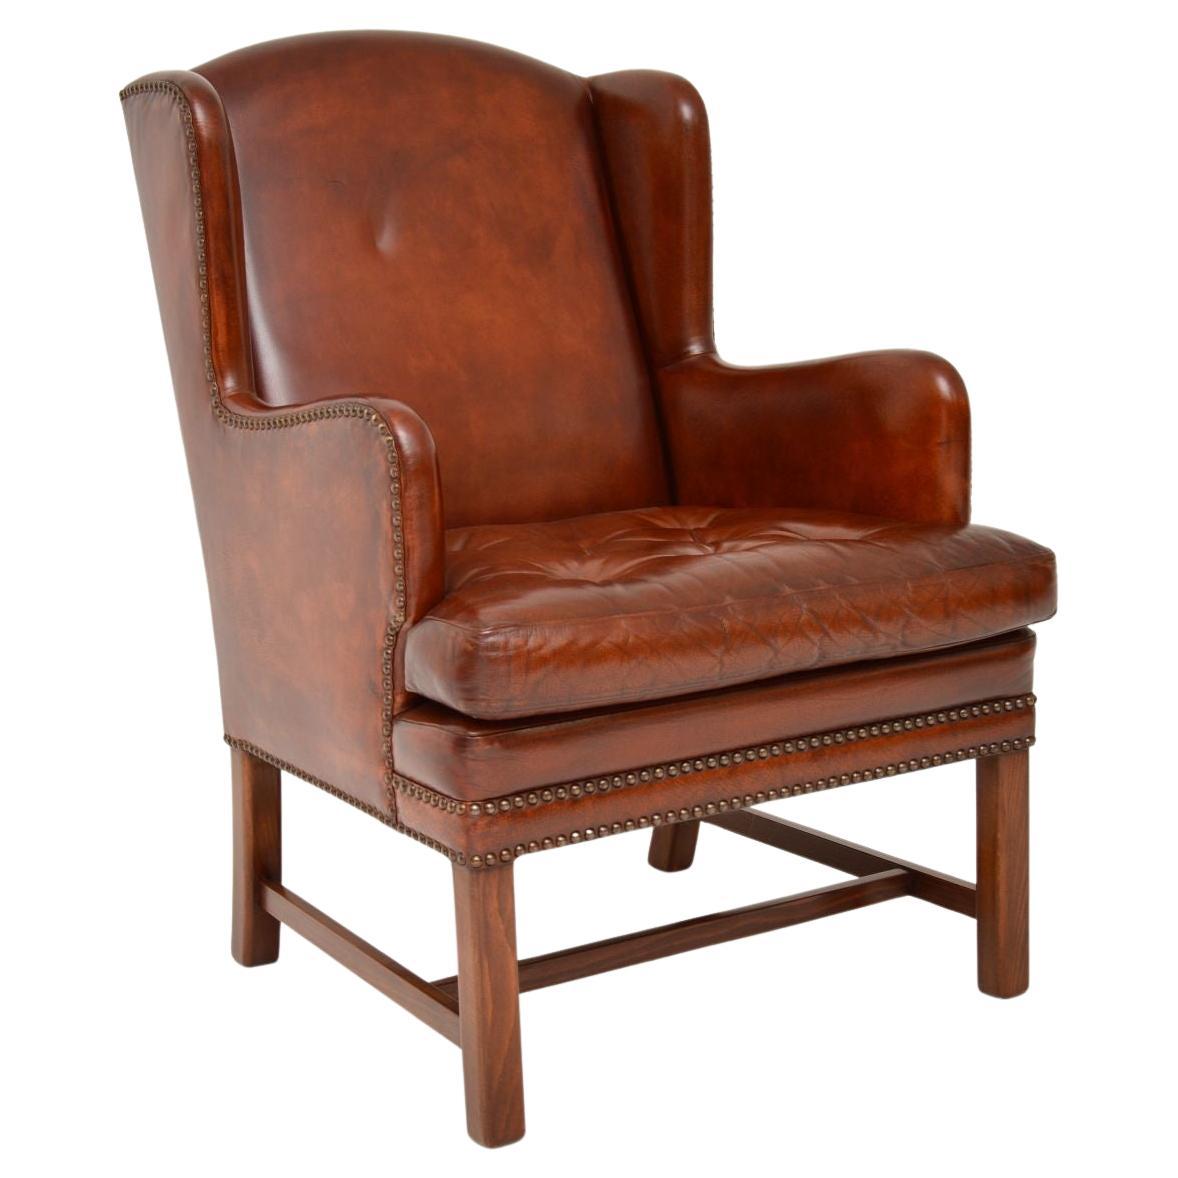 Antique Swedish Leather Wing Back Armchair For Sale